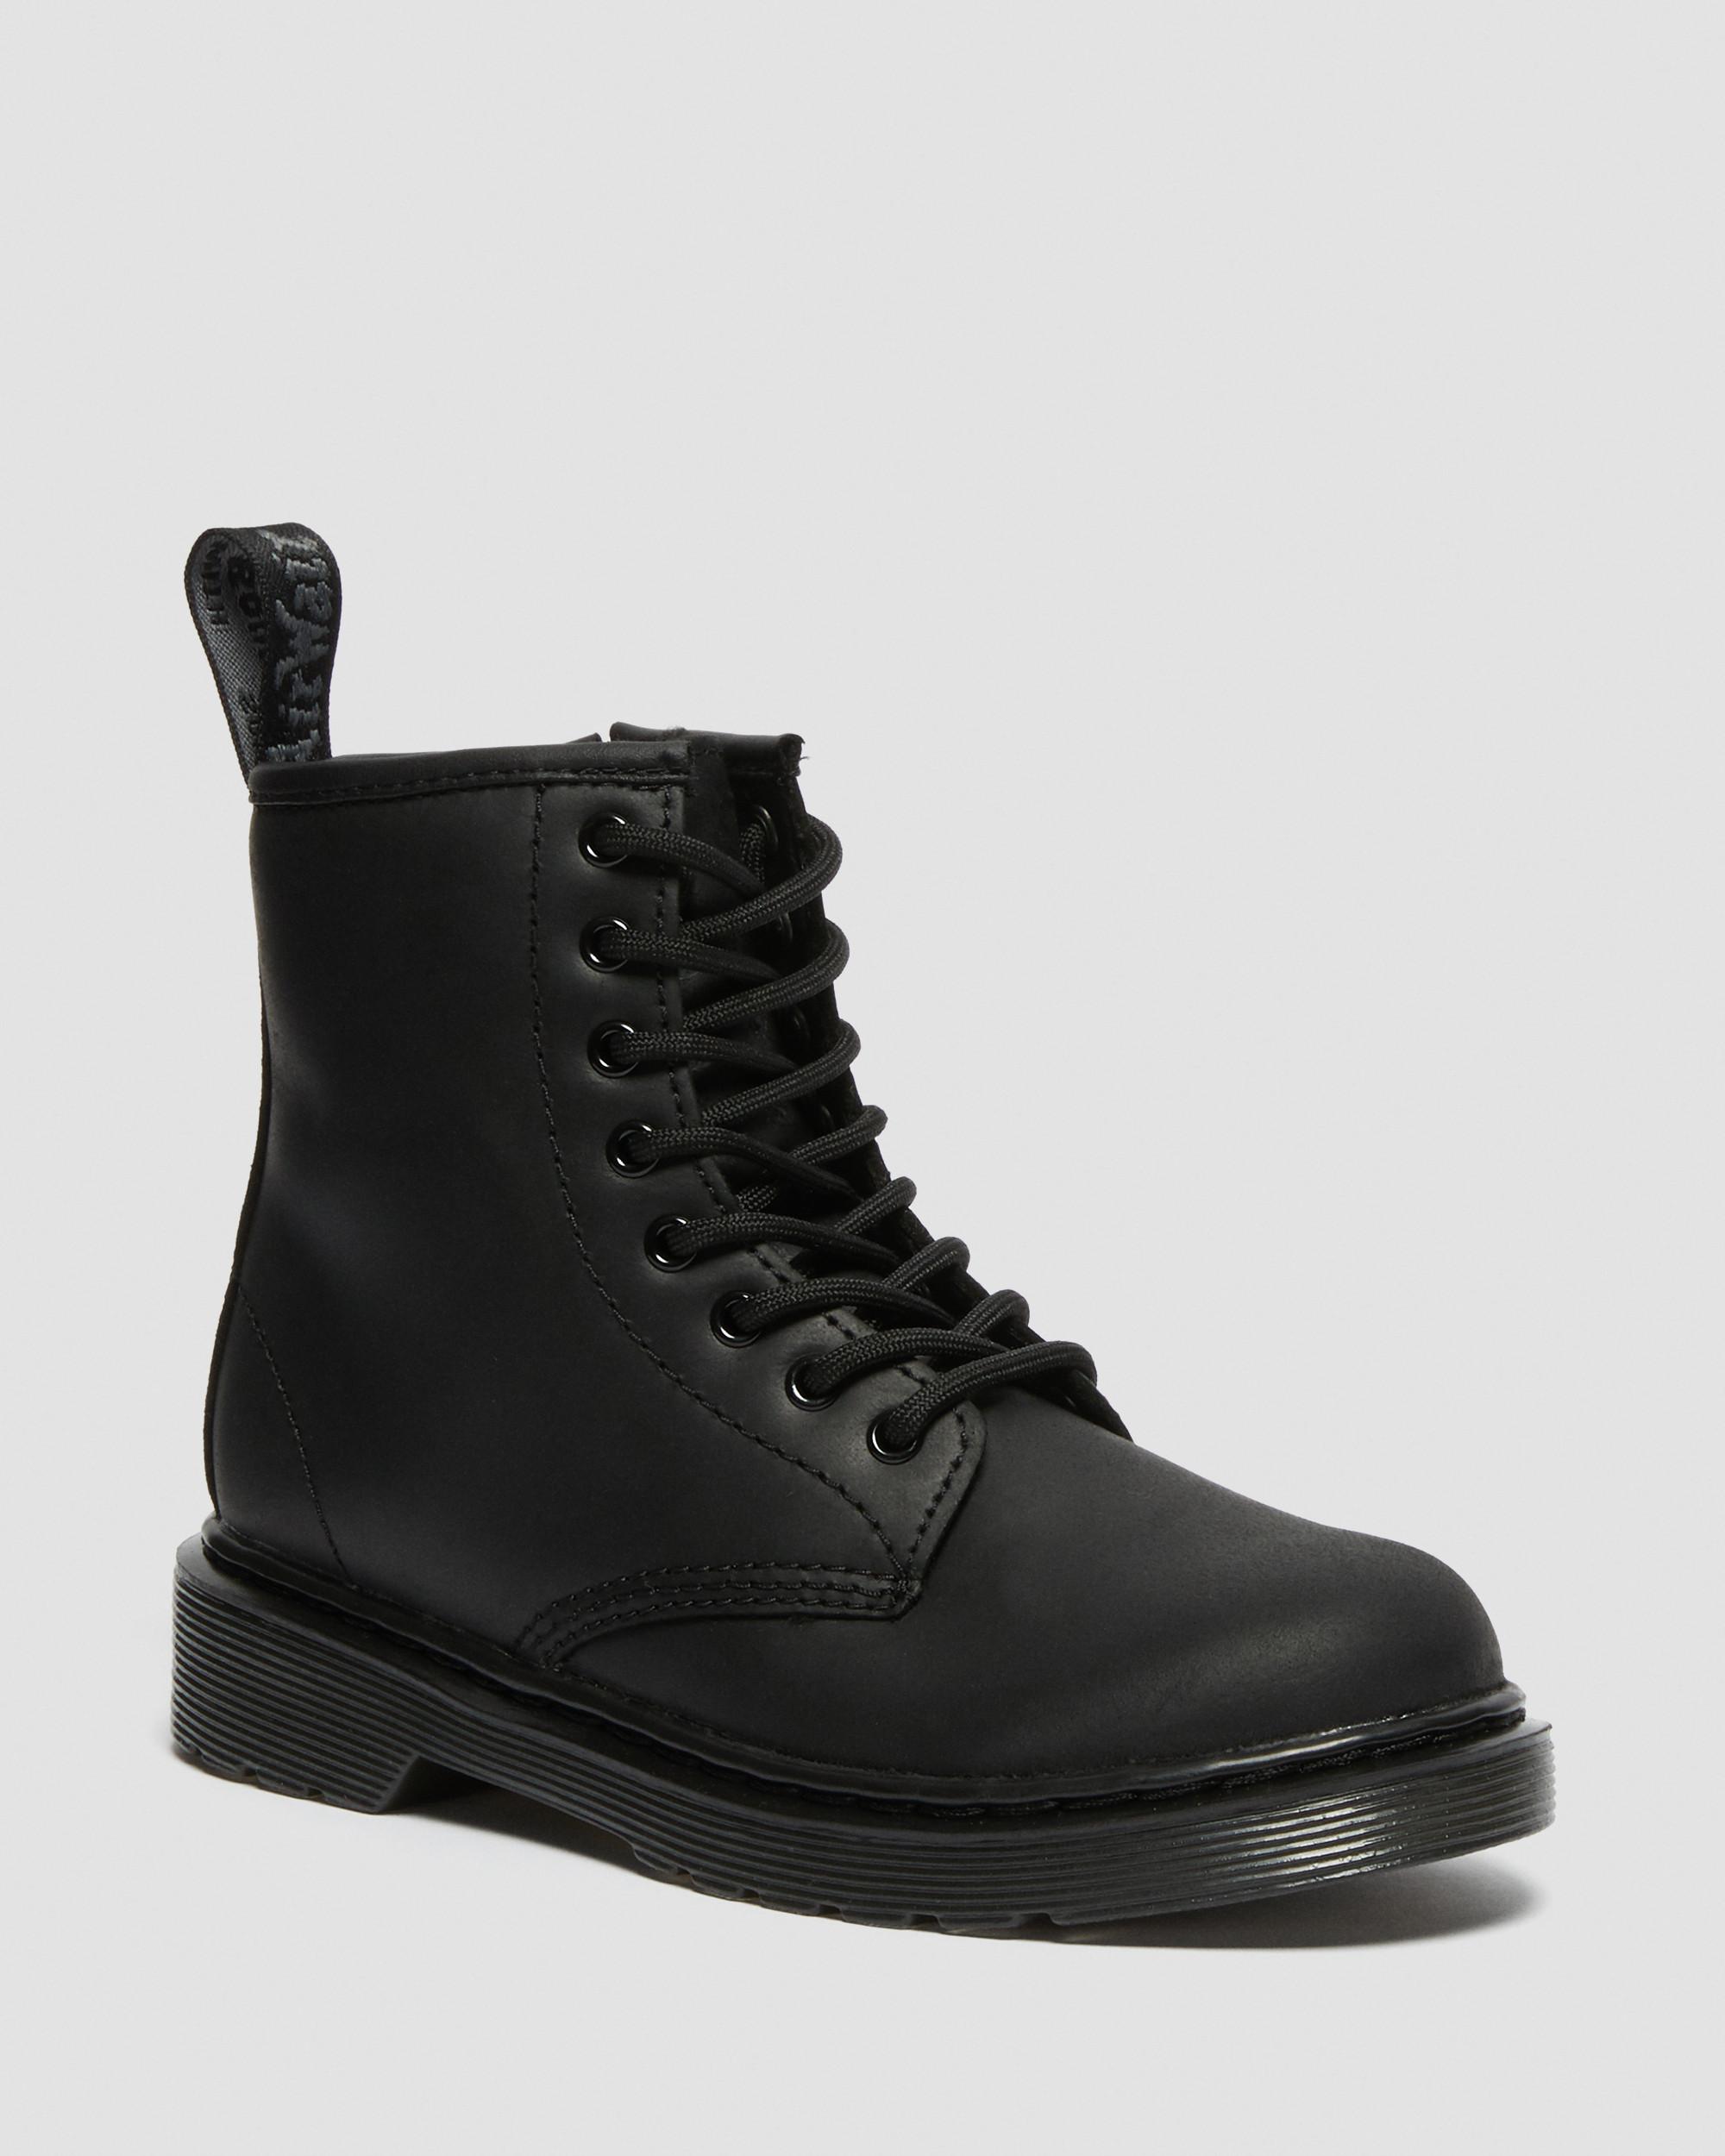 Mens Shoes Side Zipper Lace Up Leather Upper Mid Calf Combat Martin Boots Run A Size Larger,Very Stylish Color : Fleece Inside Black, Size : 8.5 M US